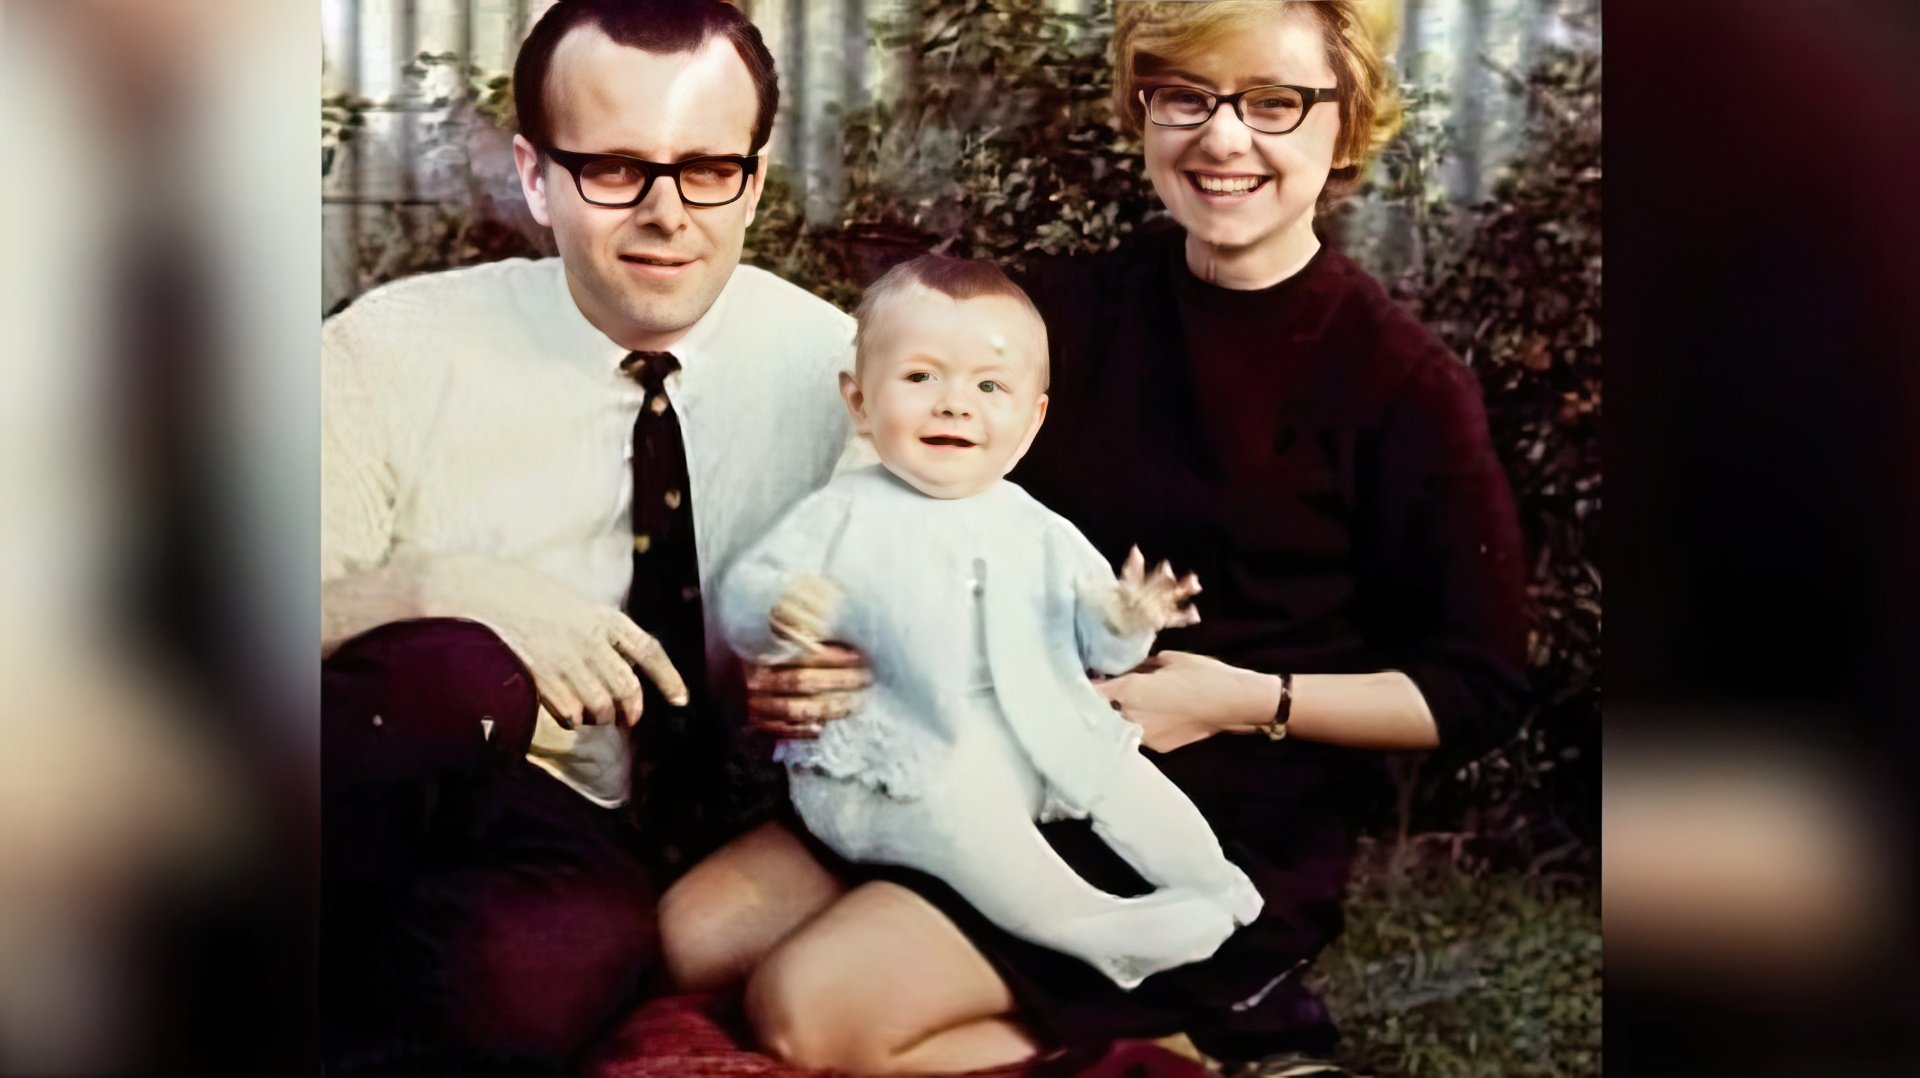 Michael Sheen in childhood with his parents